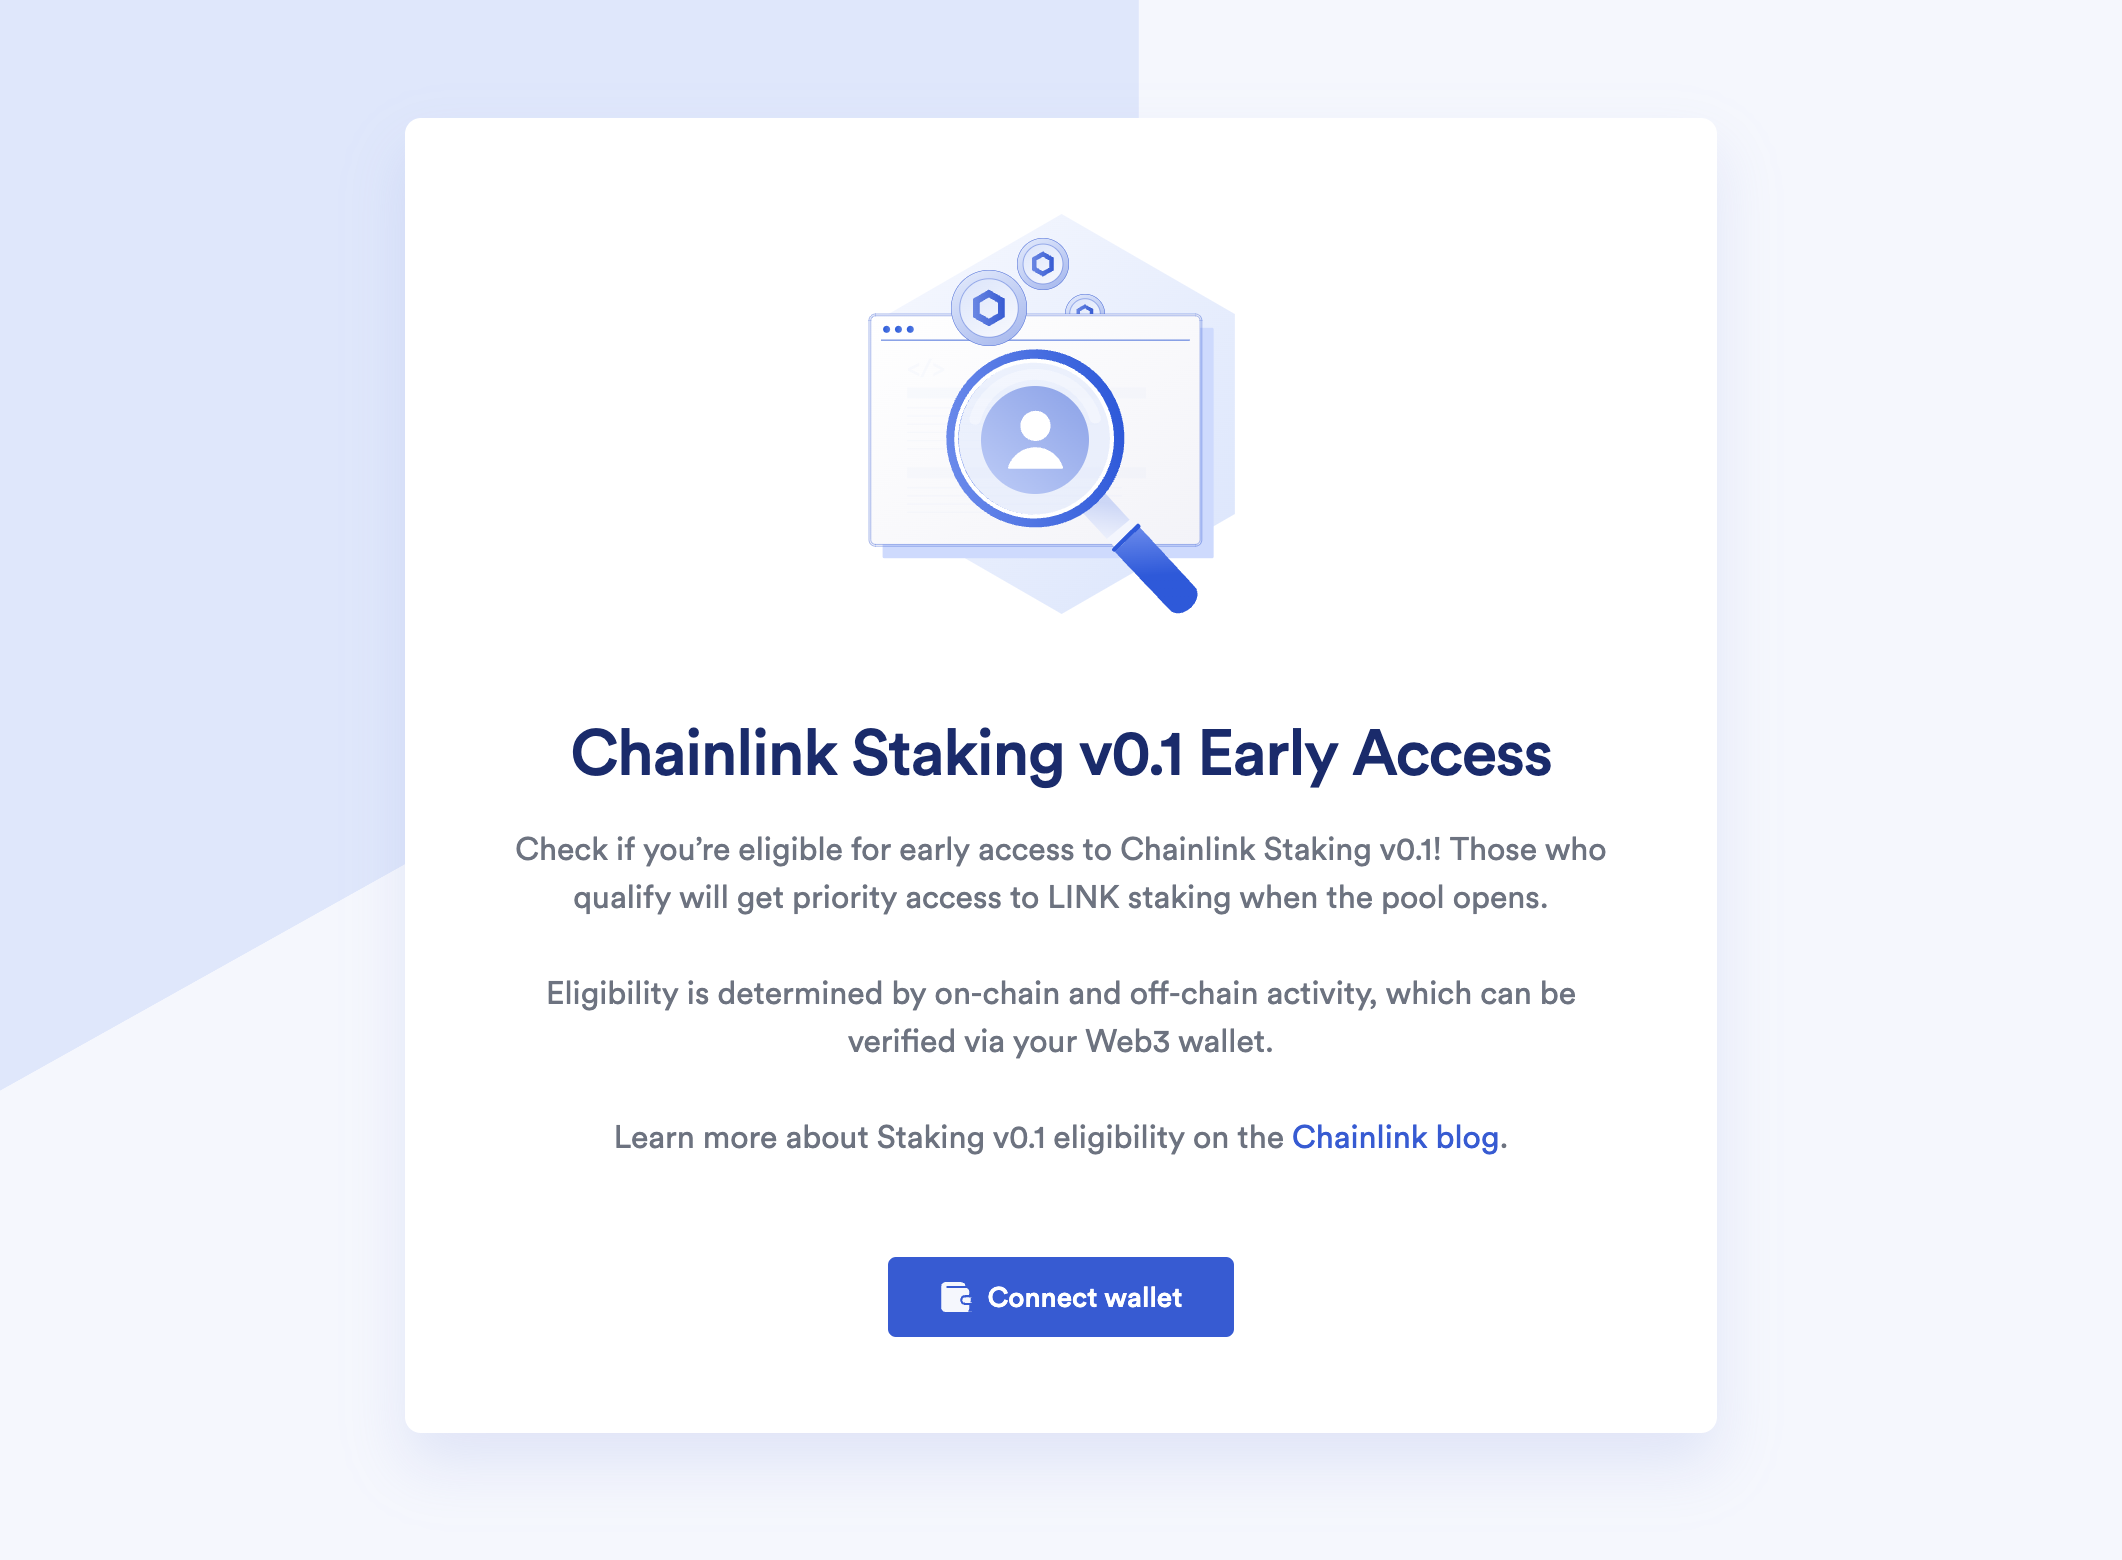 Chainlink Staking v0.1 Early Access App